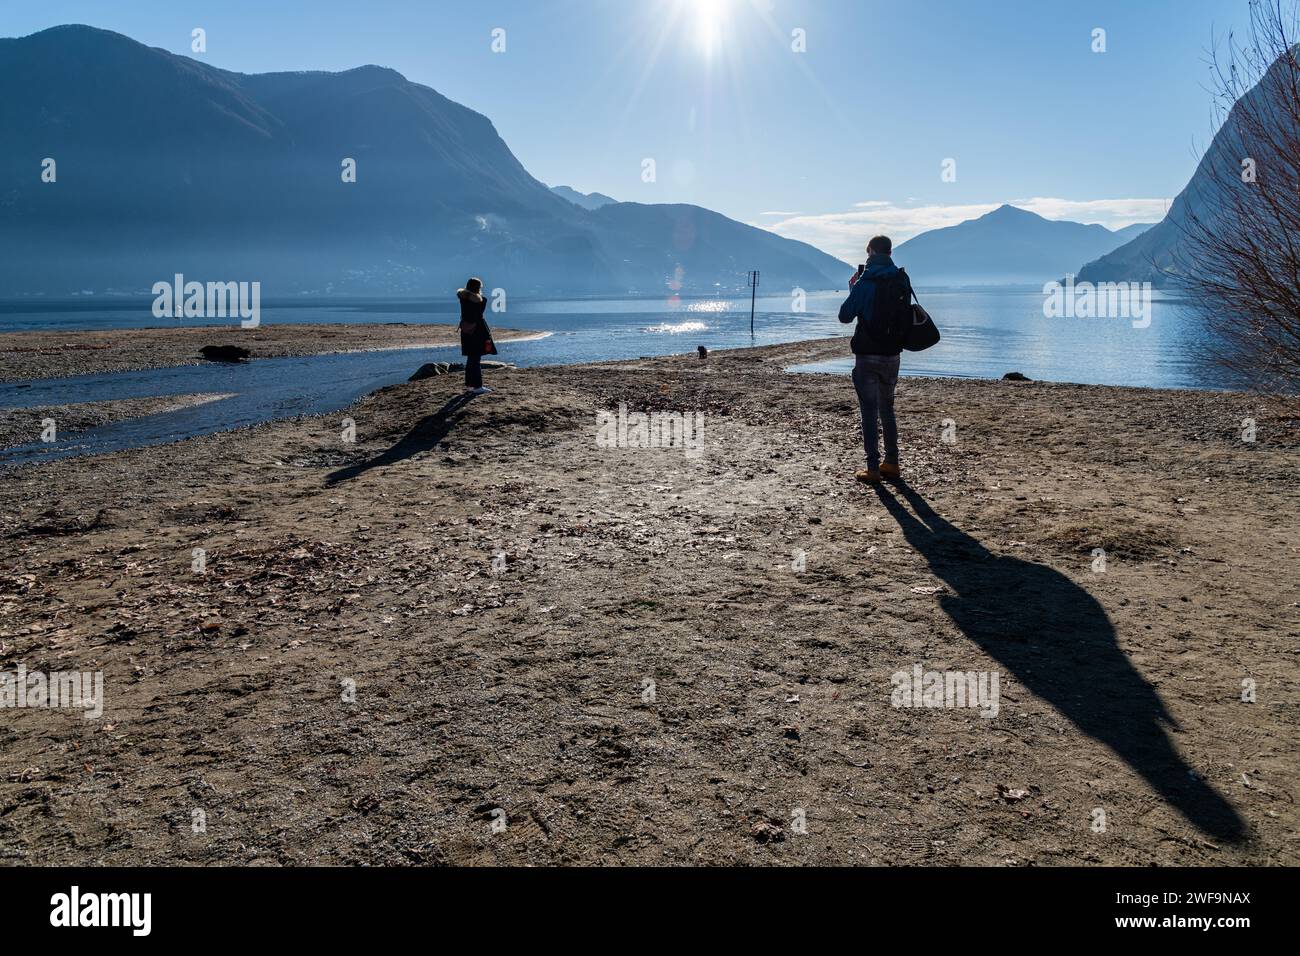 A couple playing with their dog and admiring the scenic view of Lake Lugano in the Alps on a sandy beach in Lugano, Switzerland Stock Photo